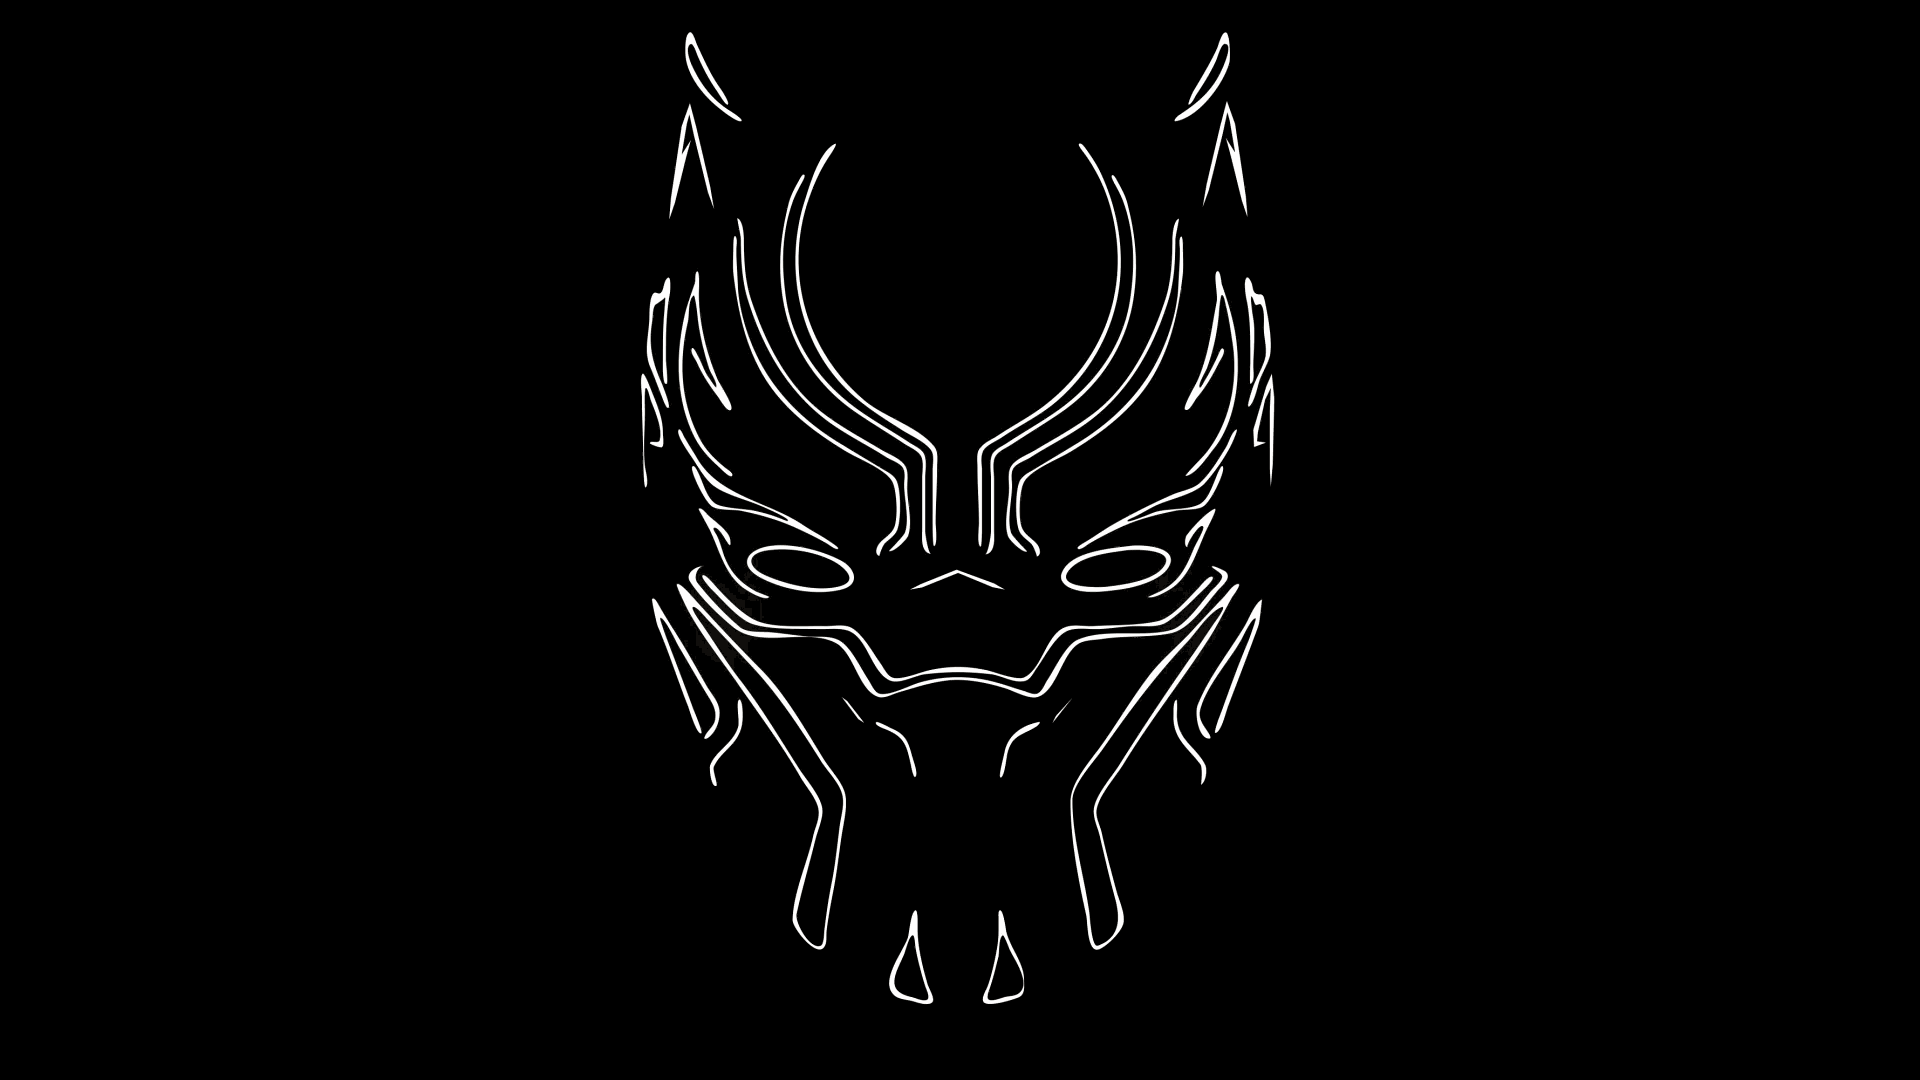 Black Panther Movie Logo - Full HD Gif Black Panther Movie Logo #4226 Wallpapers and Free Stock ...